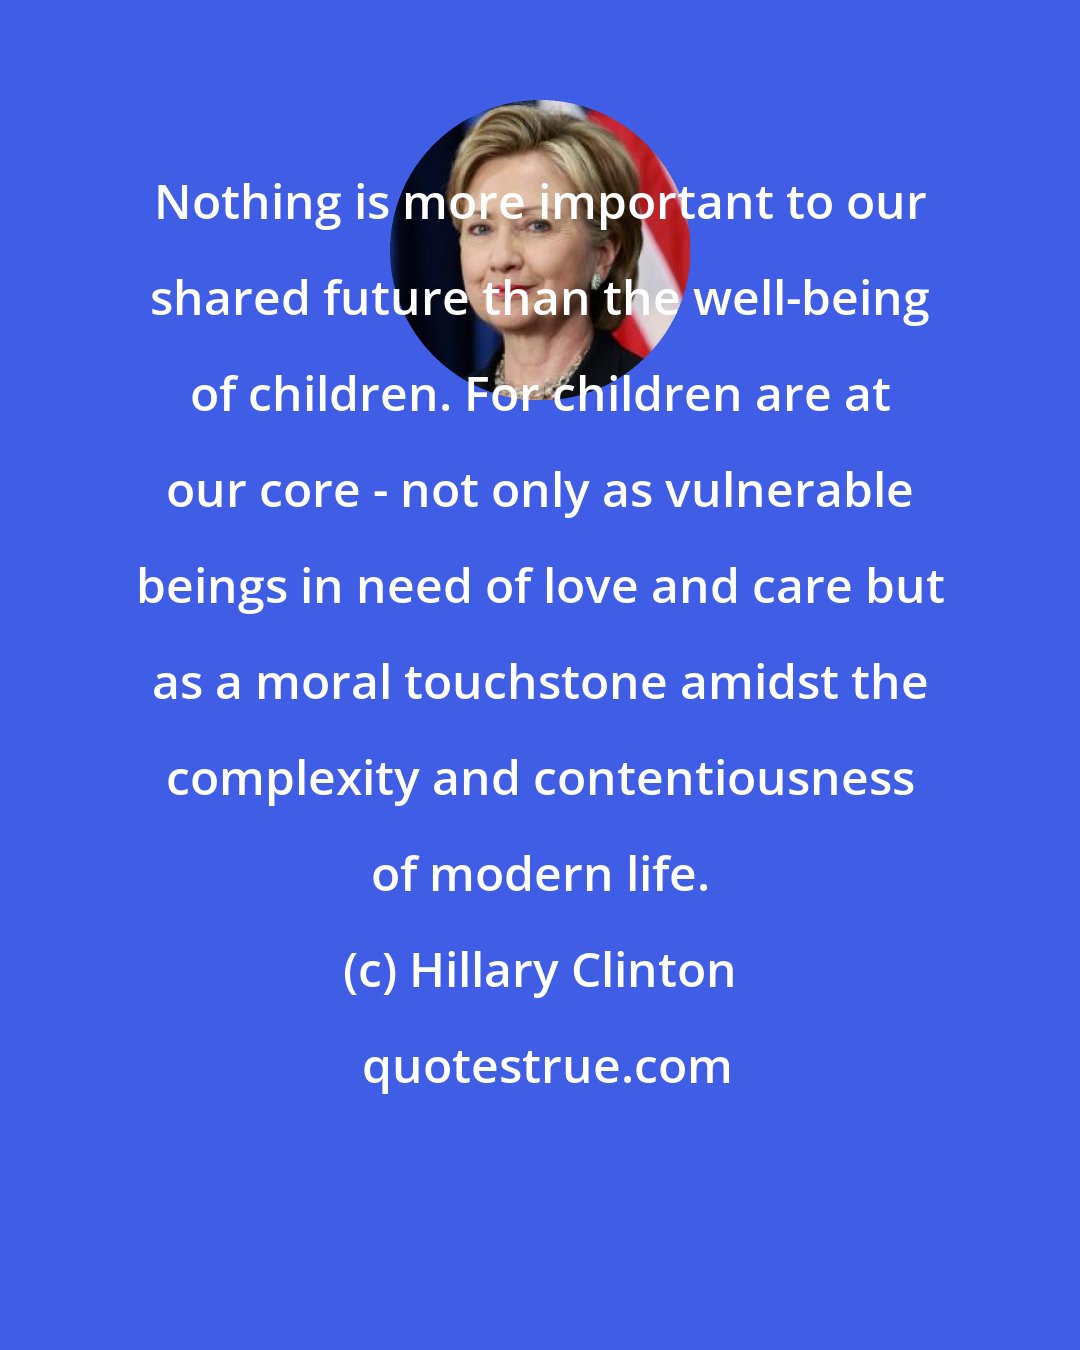 Hillary Clinton: Nothing is more important to our shared future than the well-being of children. For children are at our core - not only as vulnerable beings in need of love and care but as a moral touchstone amidst the complexity and contentiousness of modern life.